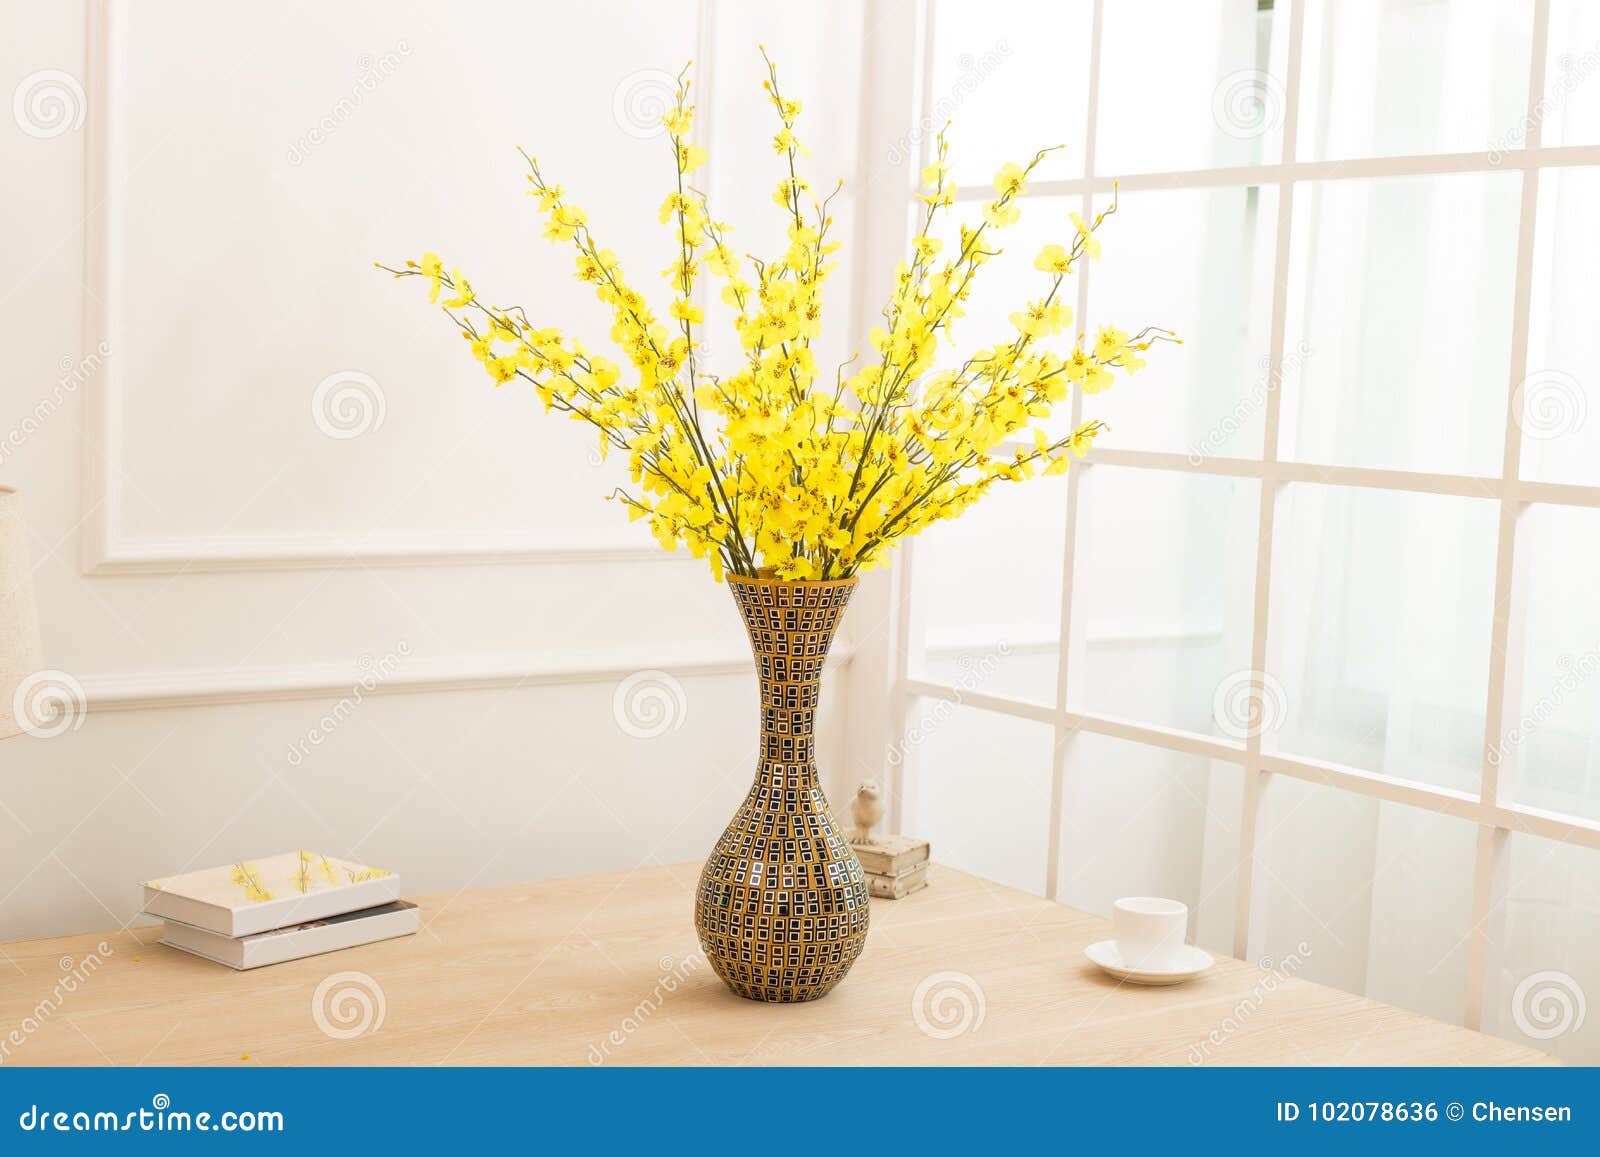 Office Tables - Flower Love  Office table design, Office